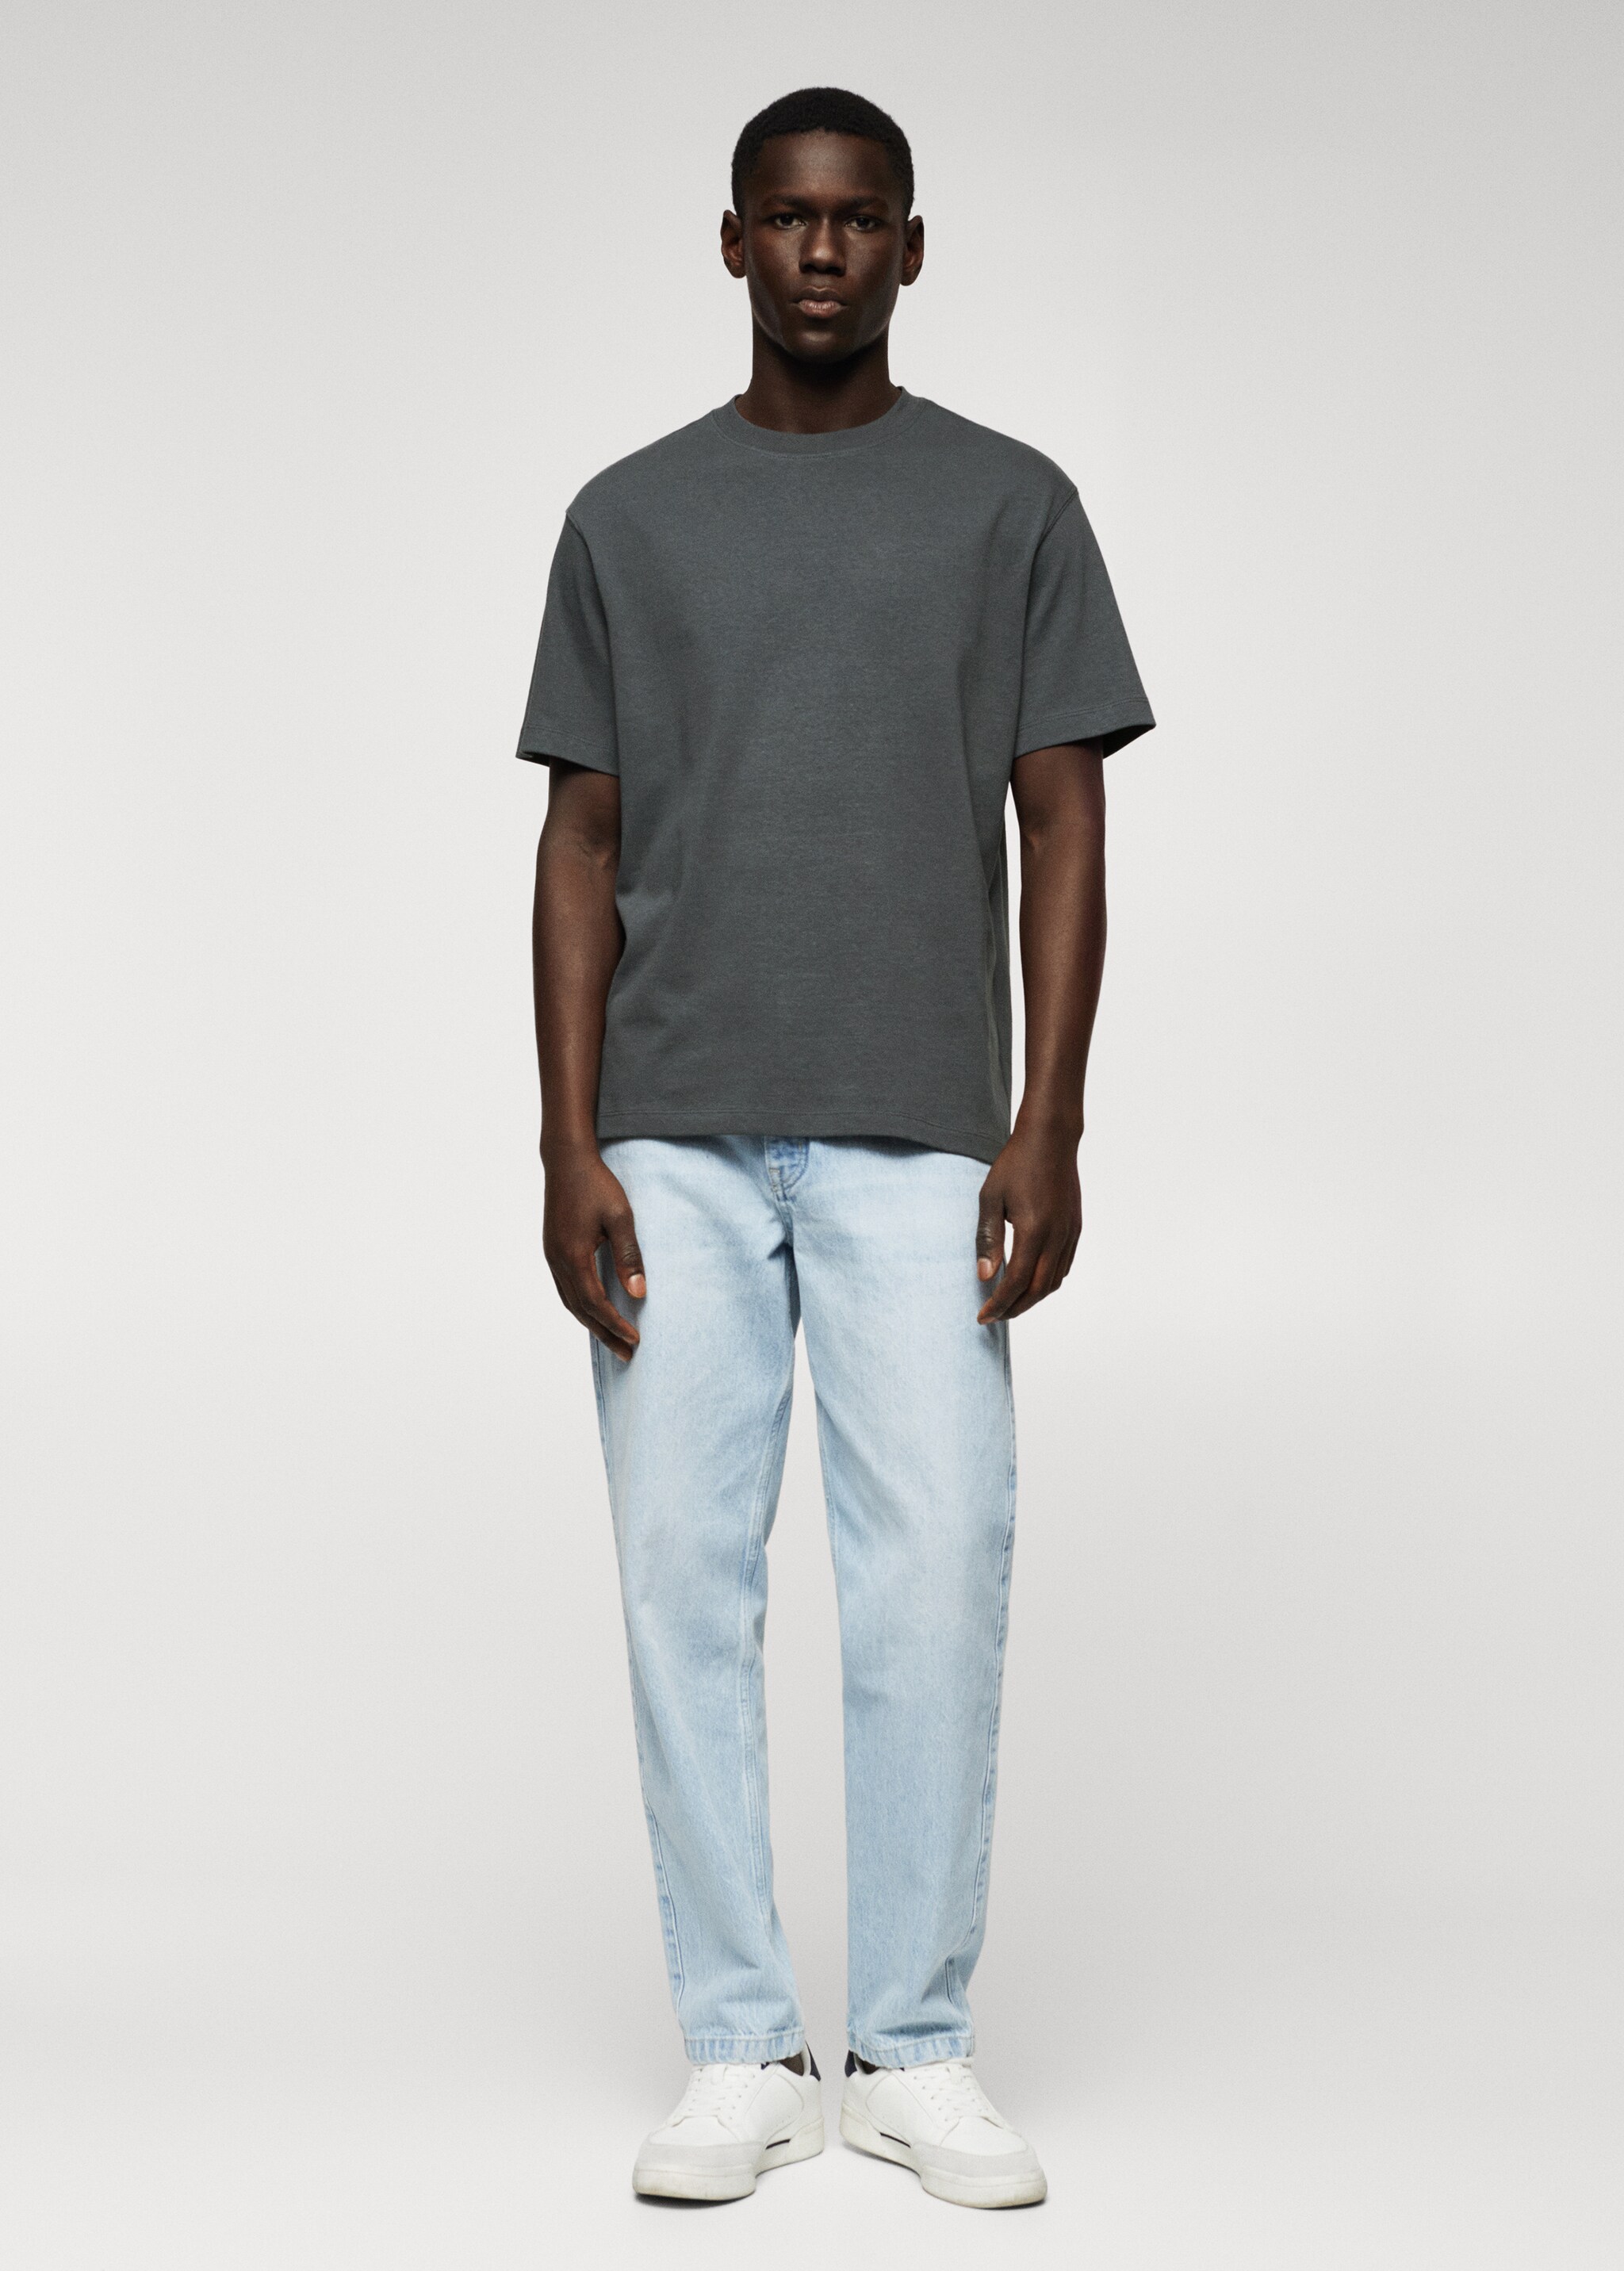 Relaxed fit cotton t-shirt - General plane